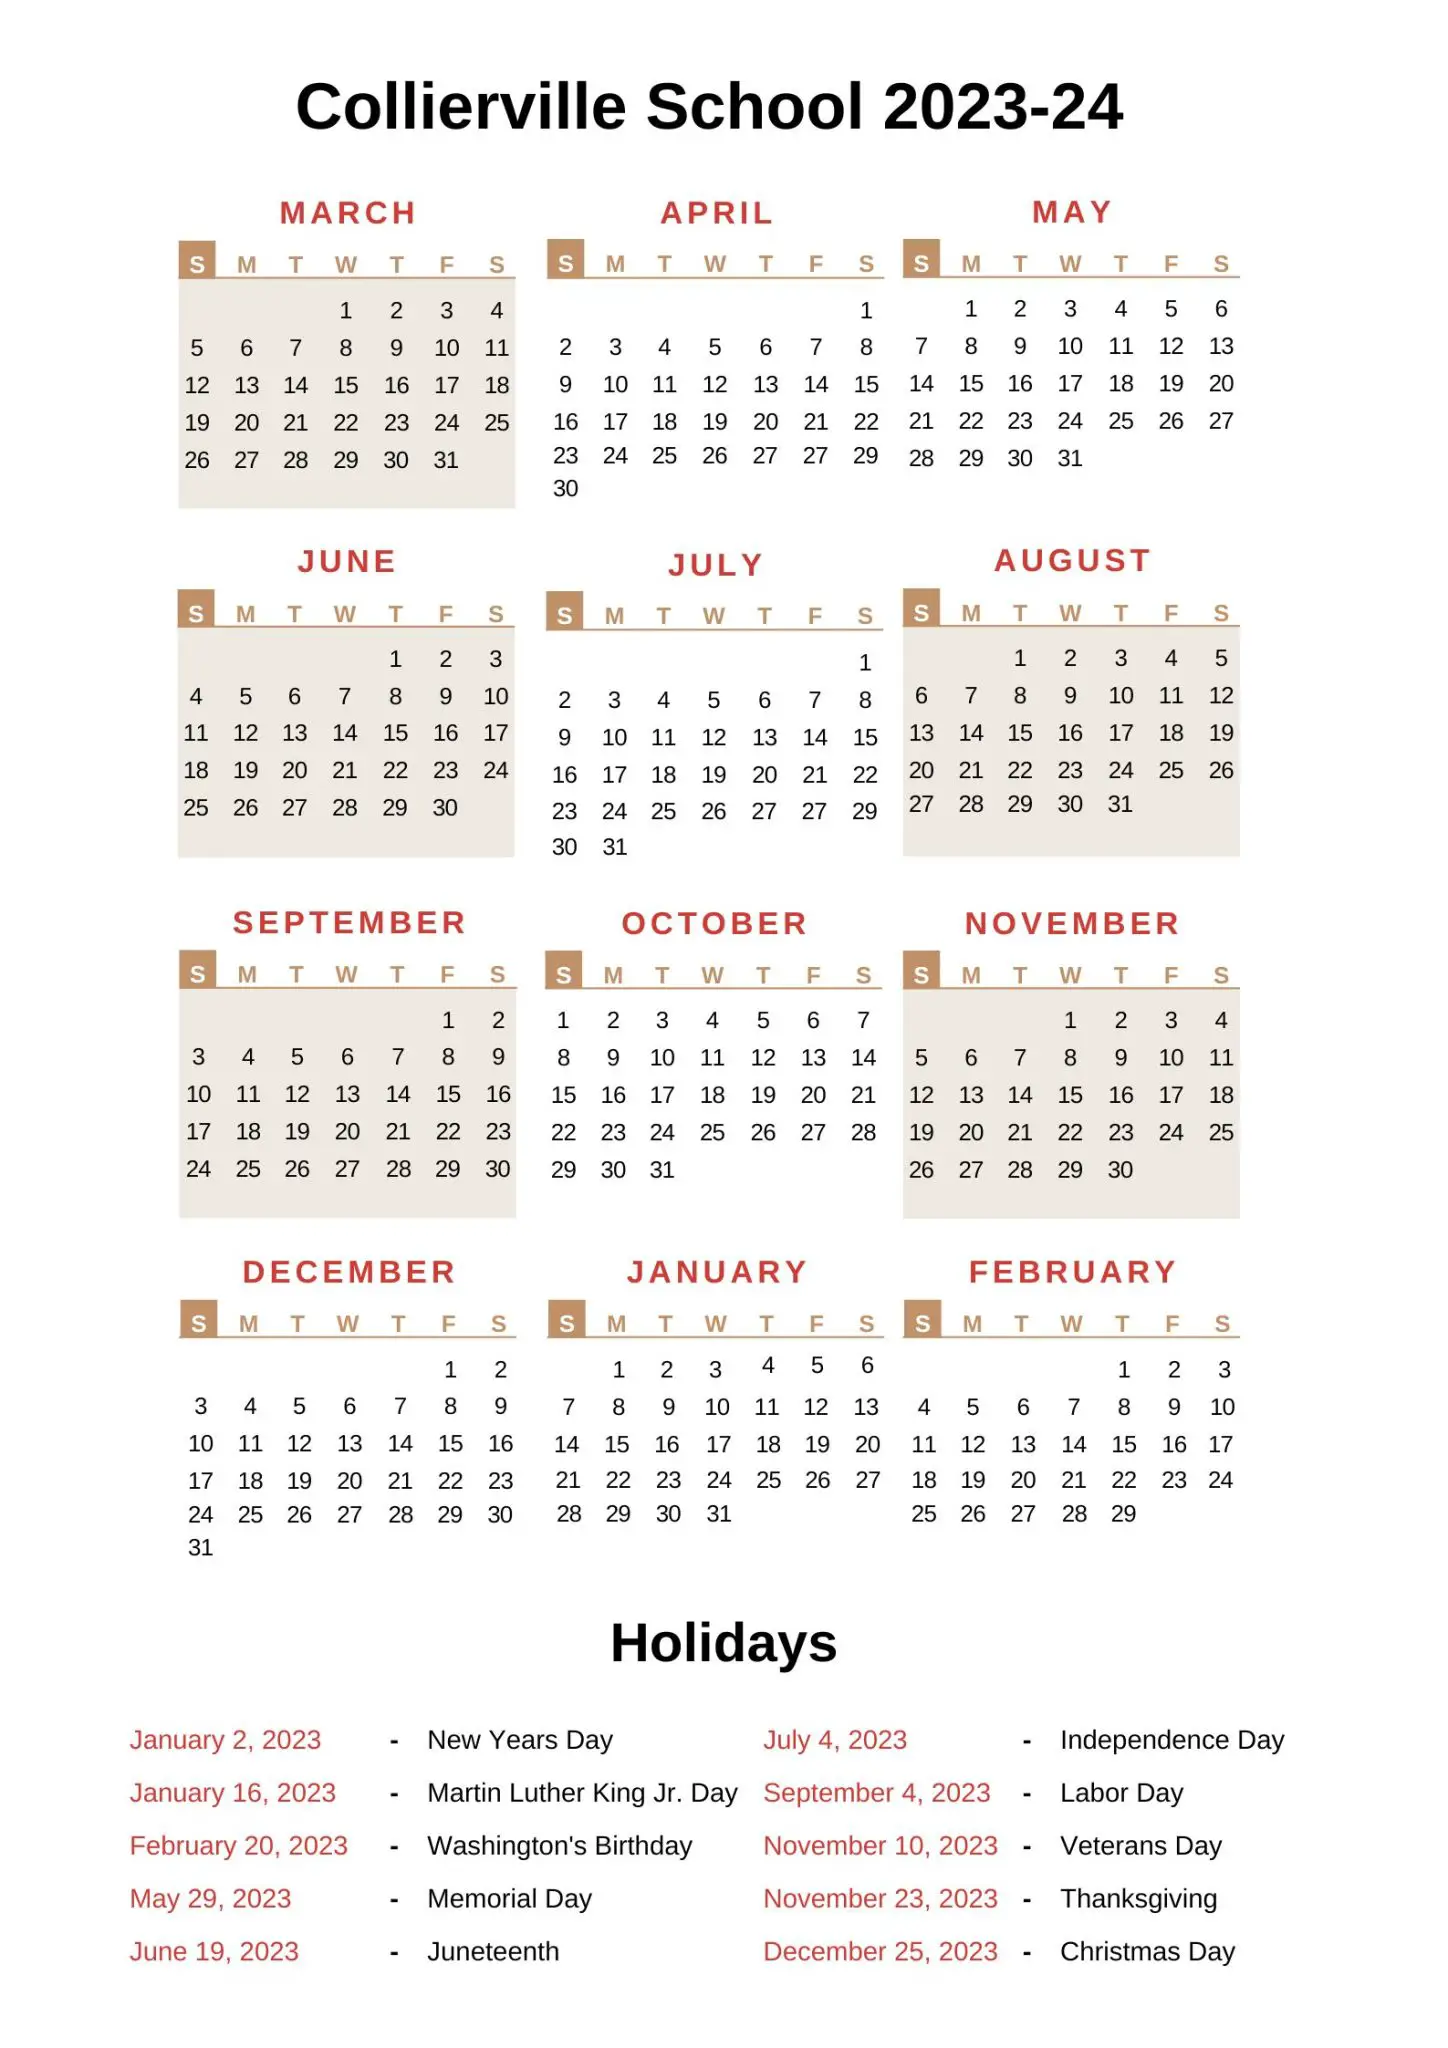 collierville-schools-calendar-2023-24-with-holidays